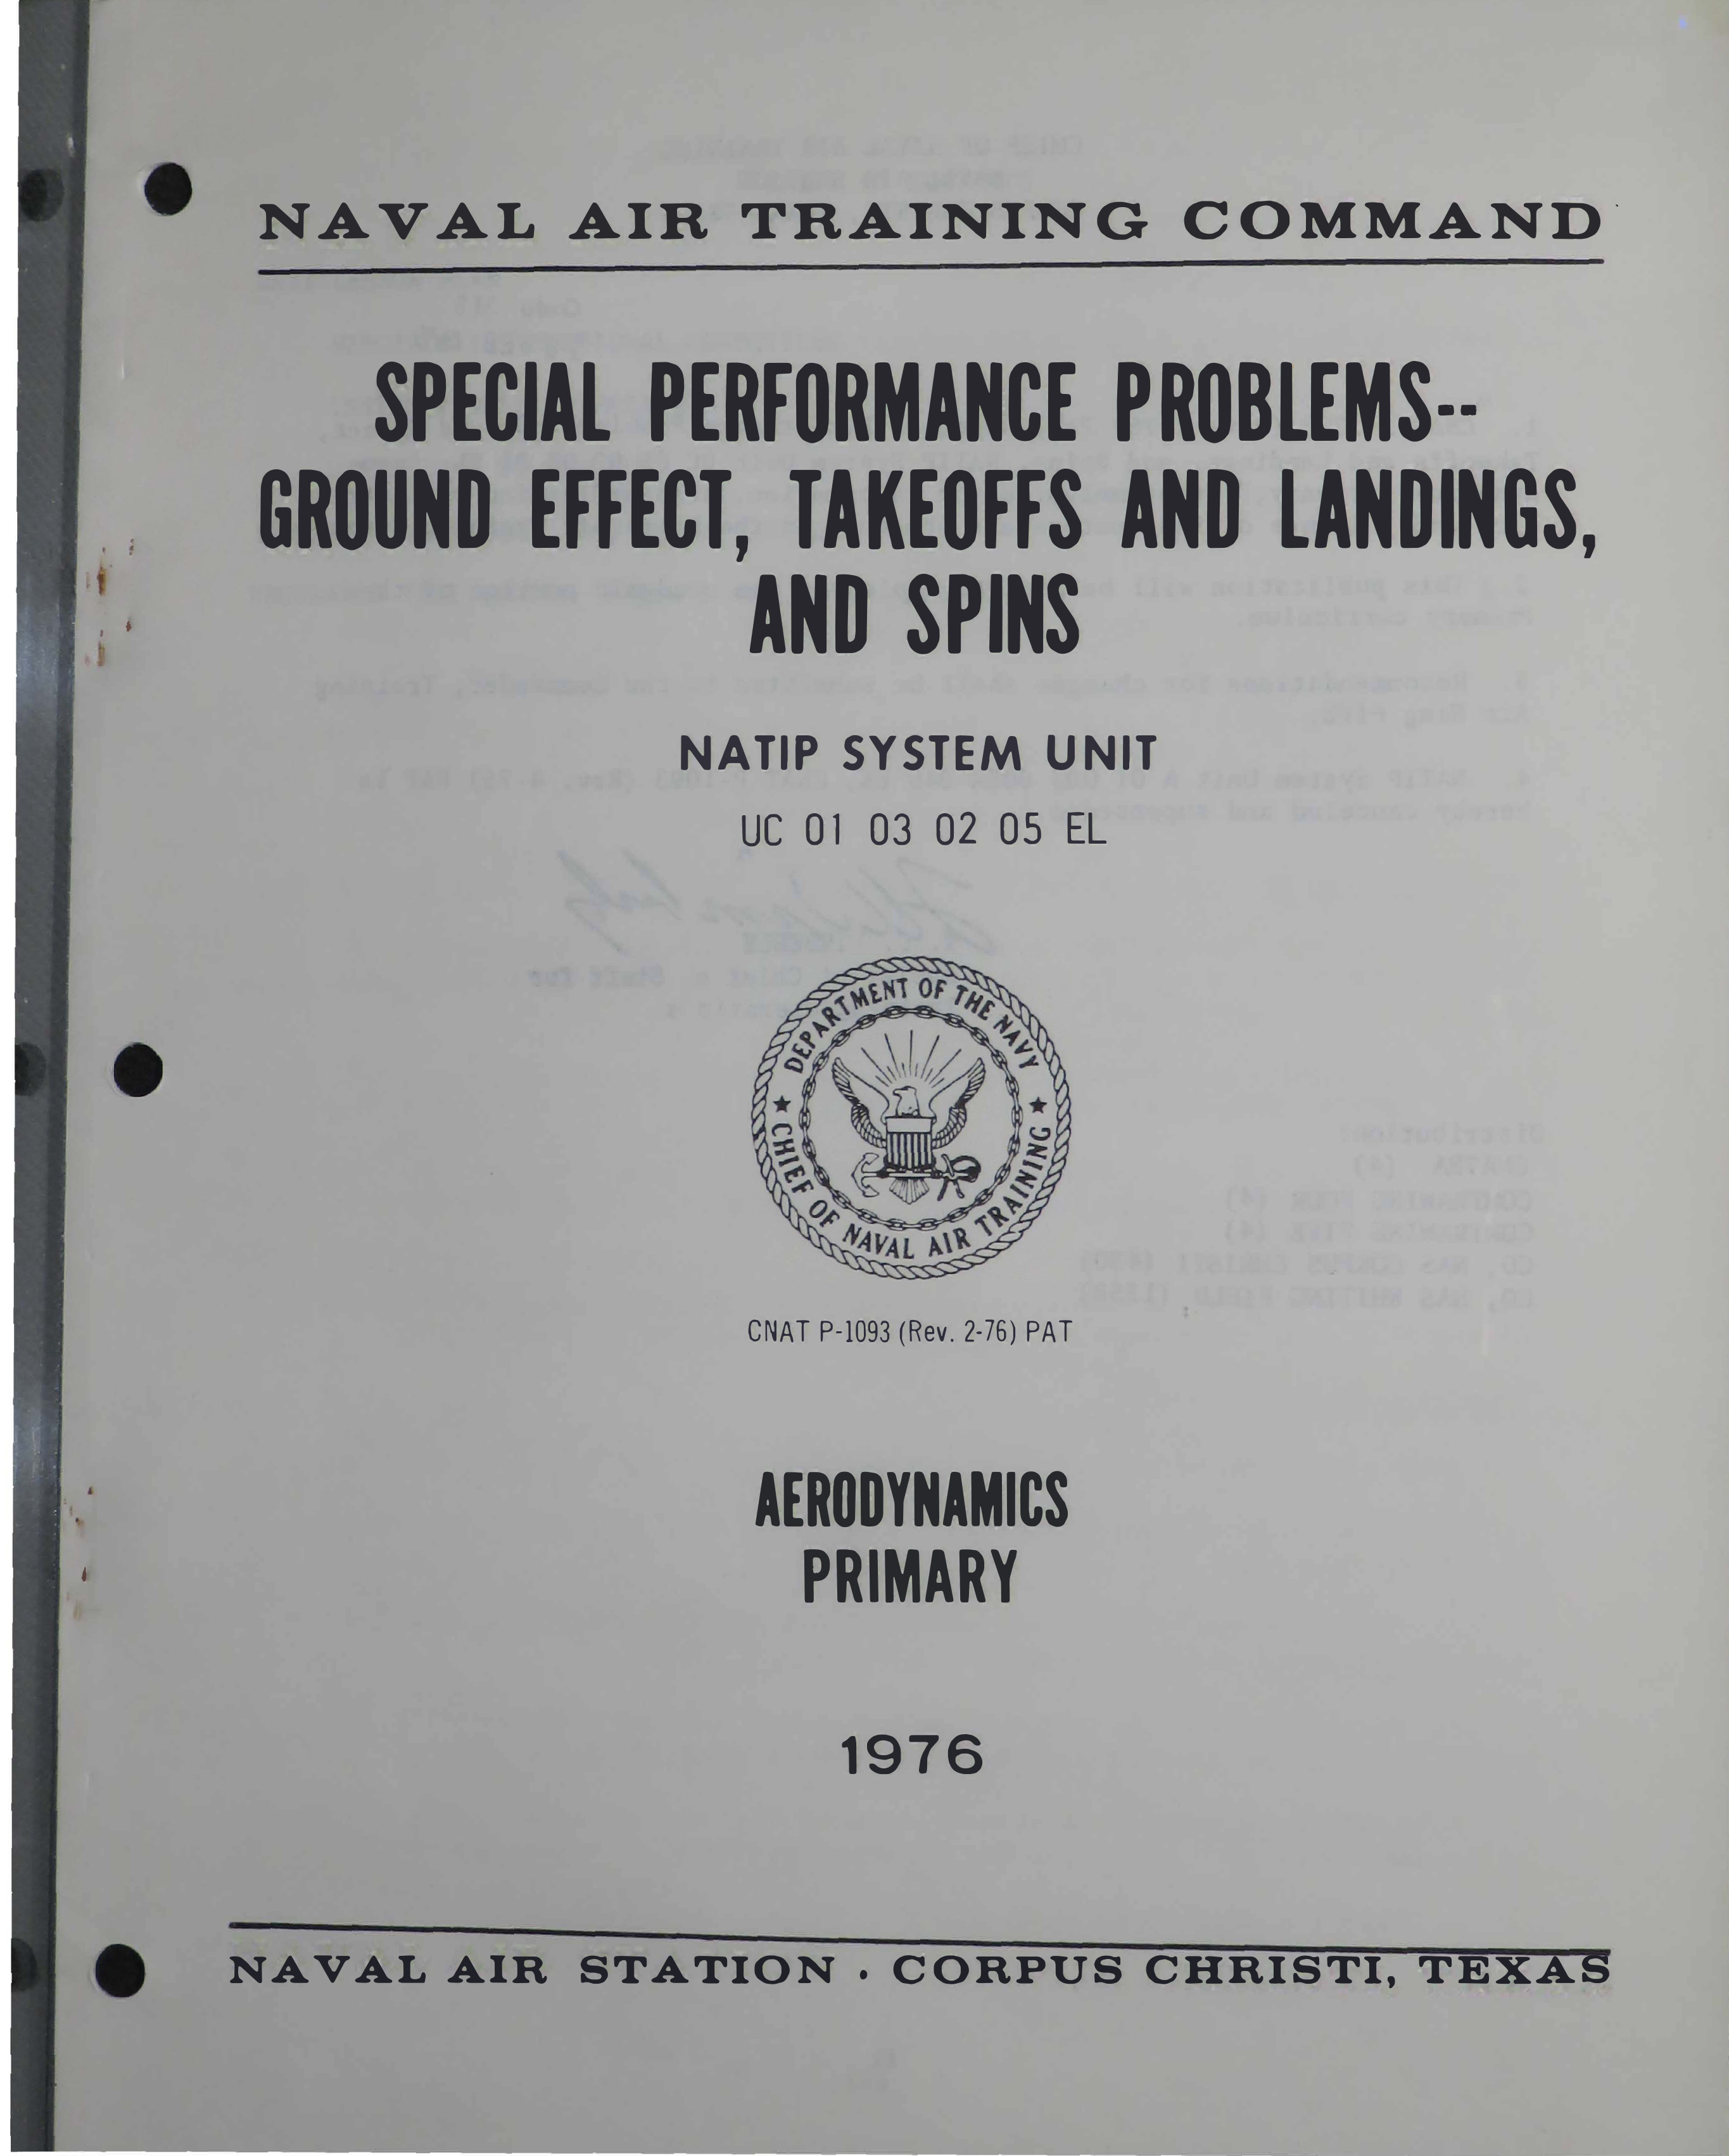 Sample page 1 from AirCorps Library document: Special Performance Problems - Ground Effect, Takeoffs, Landings, and Spins